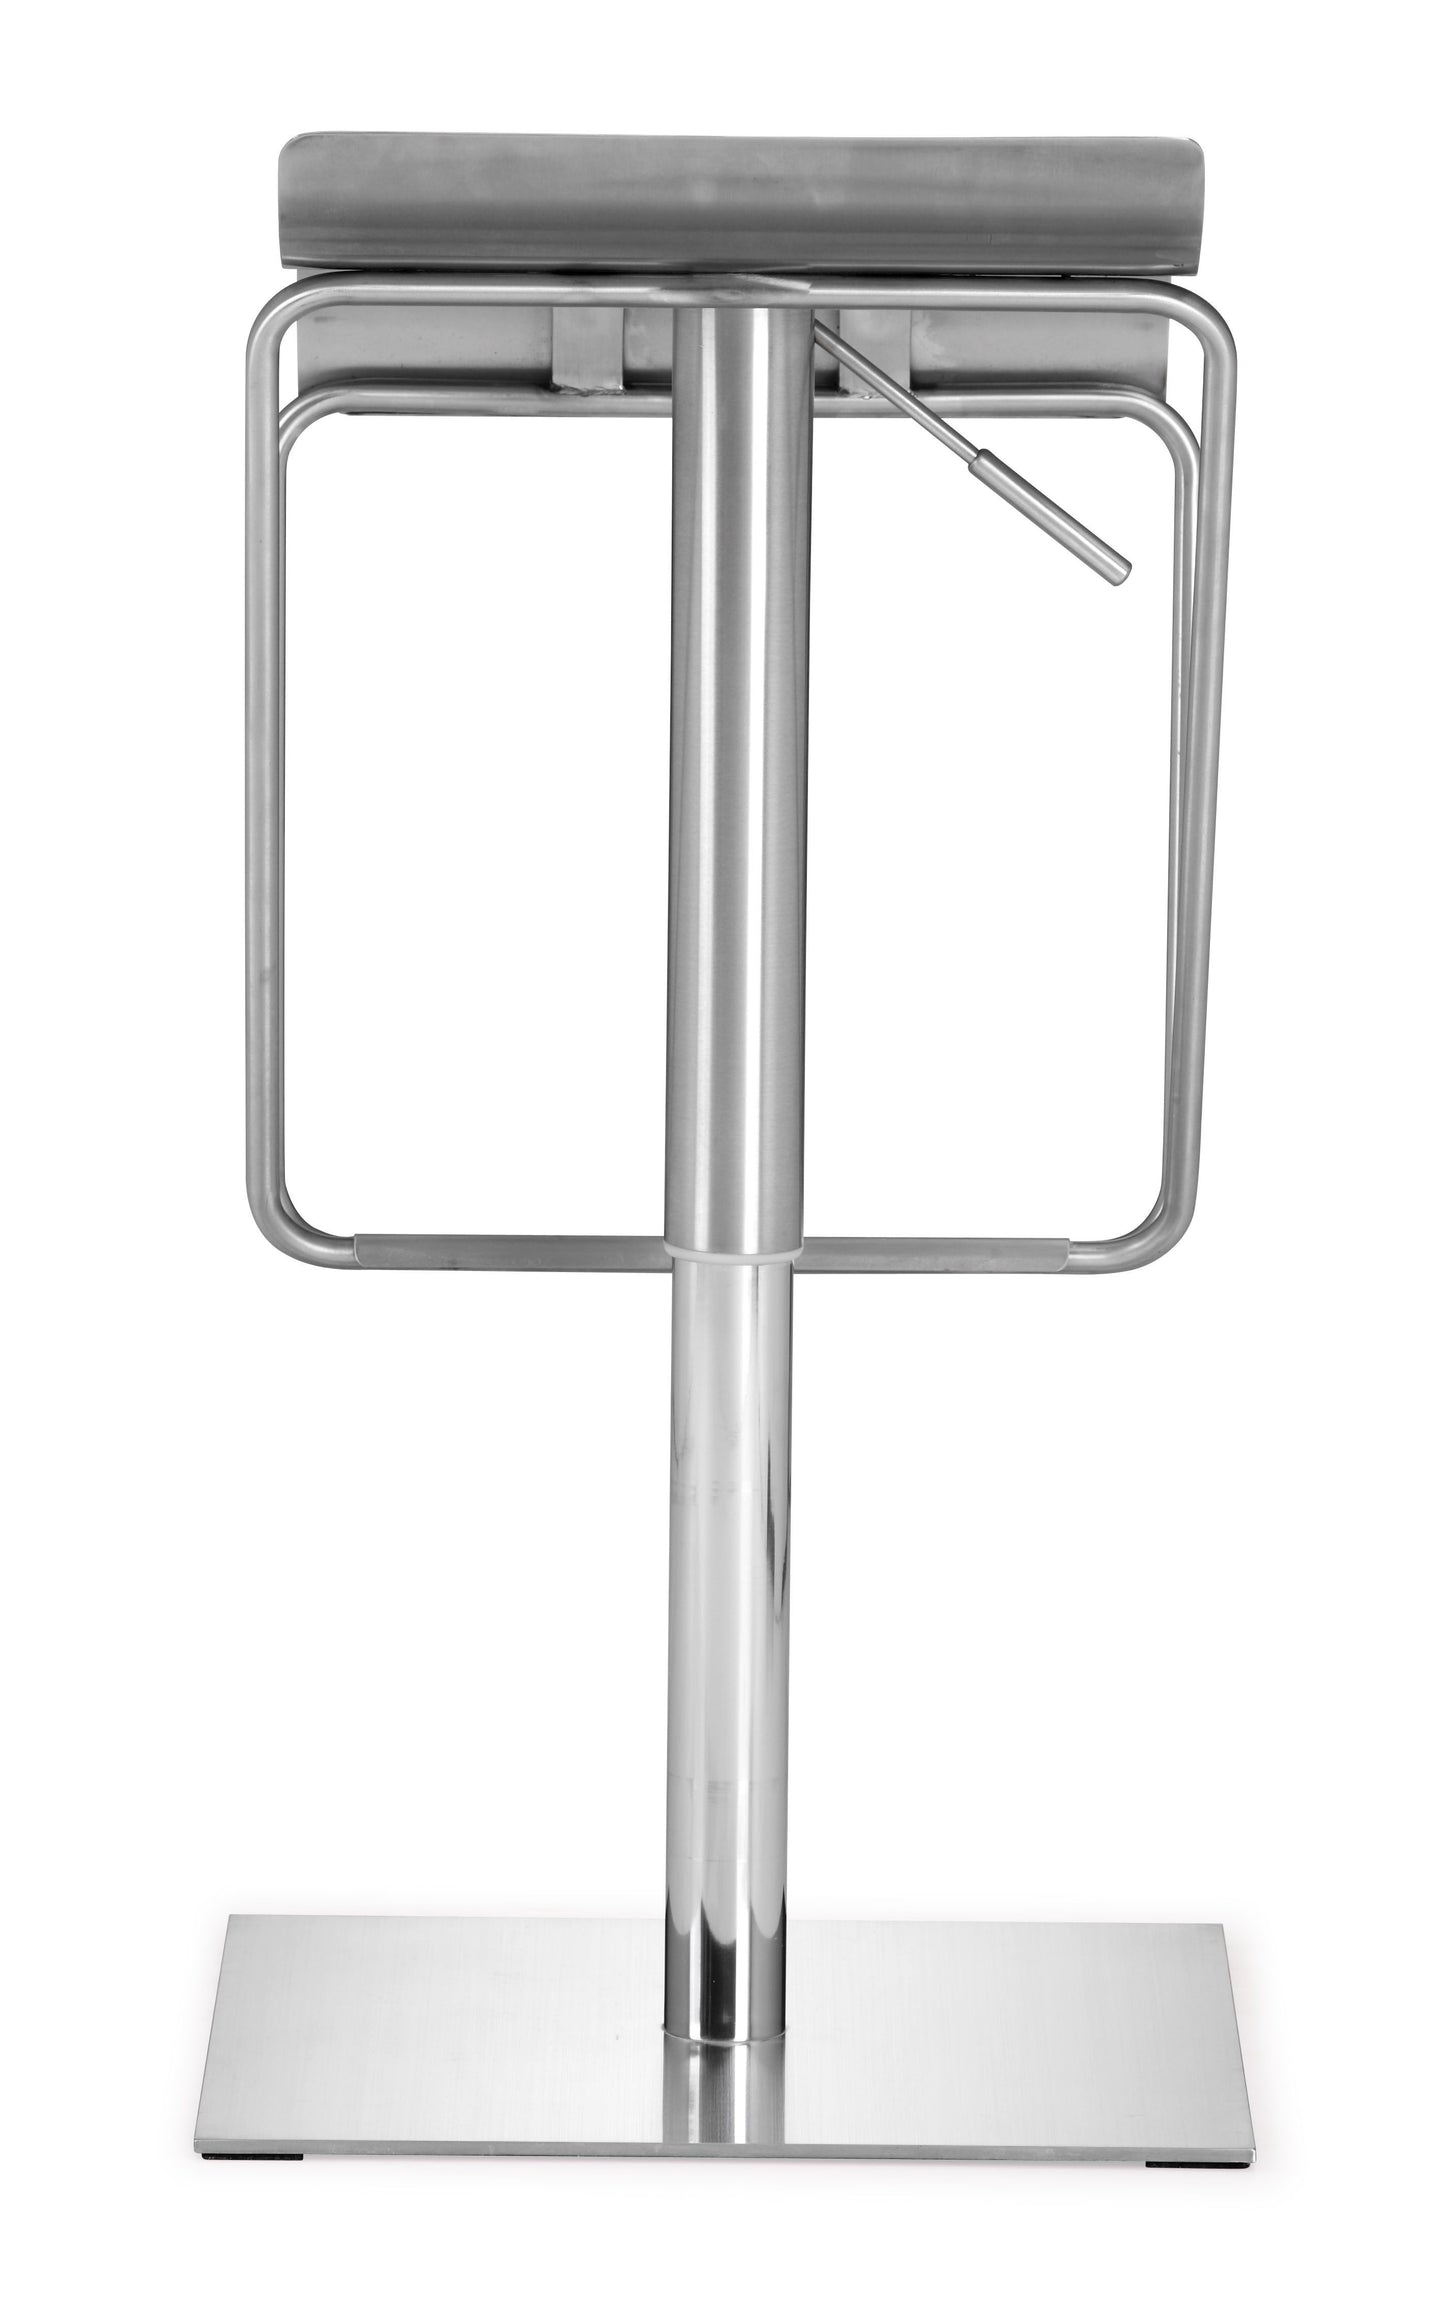 Dazzer Barstool Brushed Stainless Steel